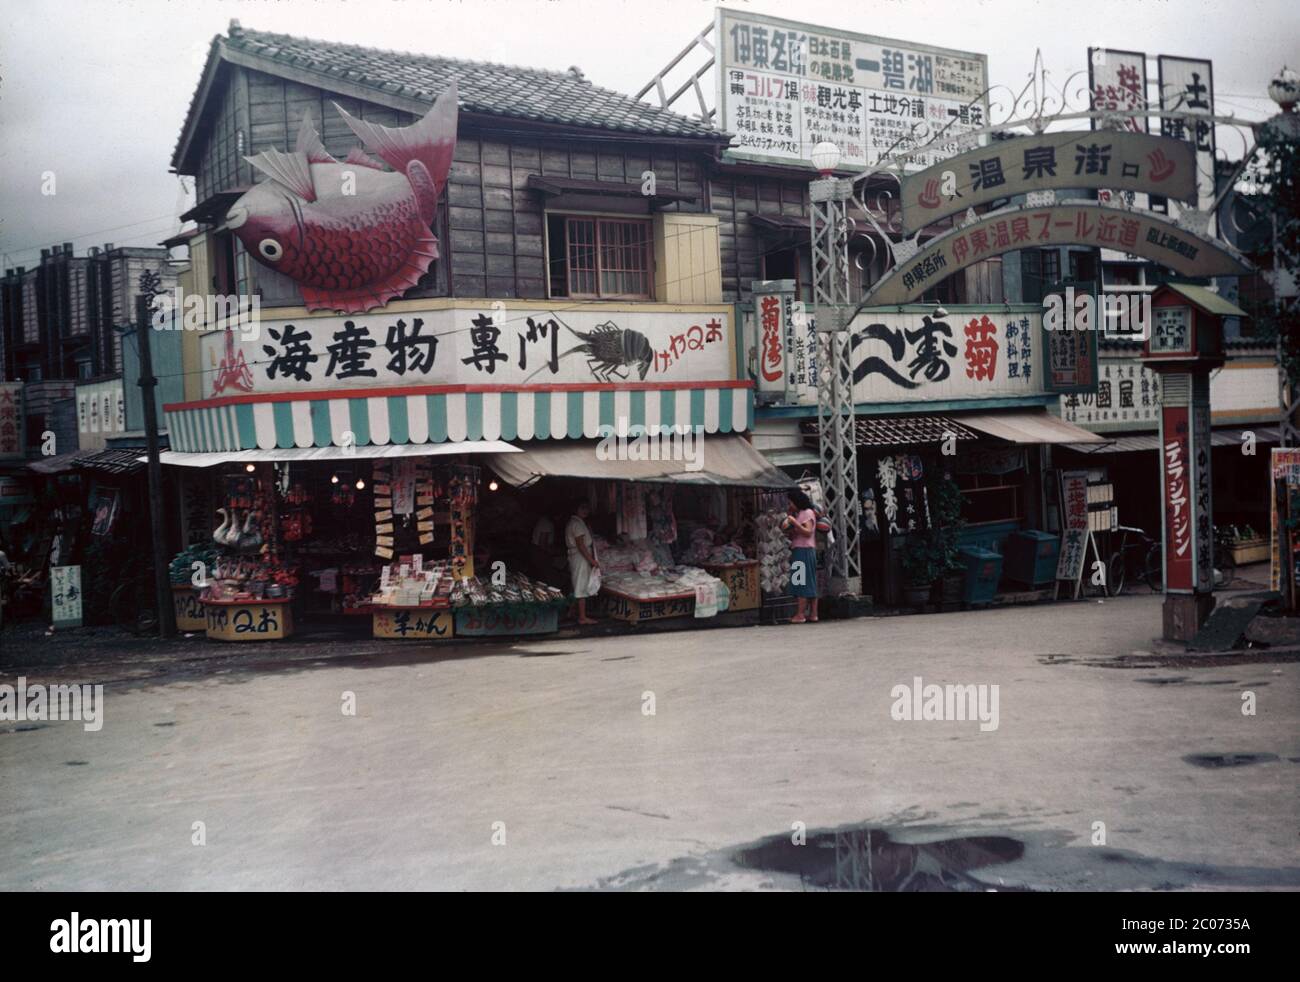 1950s Japan Shops At Ito Spa Shops At The Onsengai Shopping Street 温泉街 In Ito Spa 伊東温泉 Shizuoka Prefecture Ca 1950 Showa 25 The Lower Sign Above The